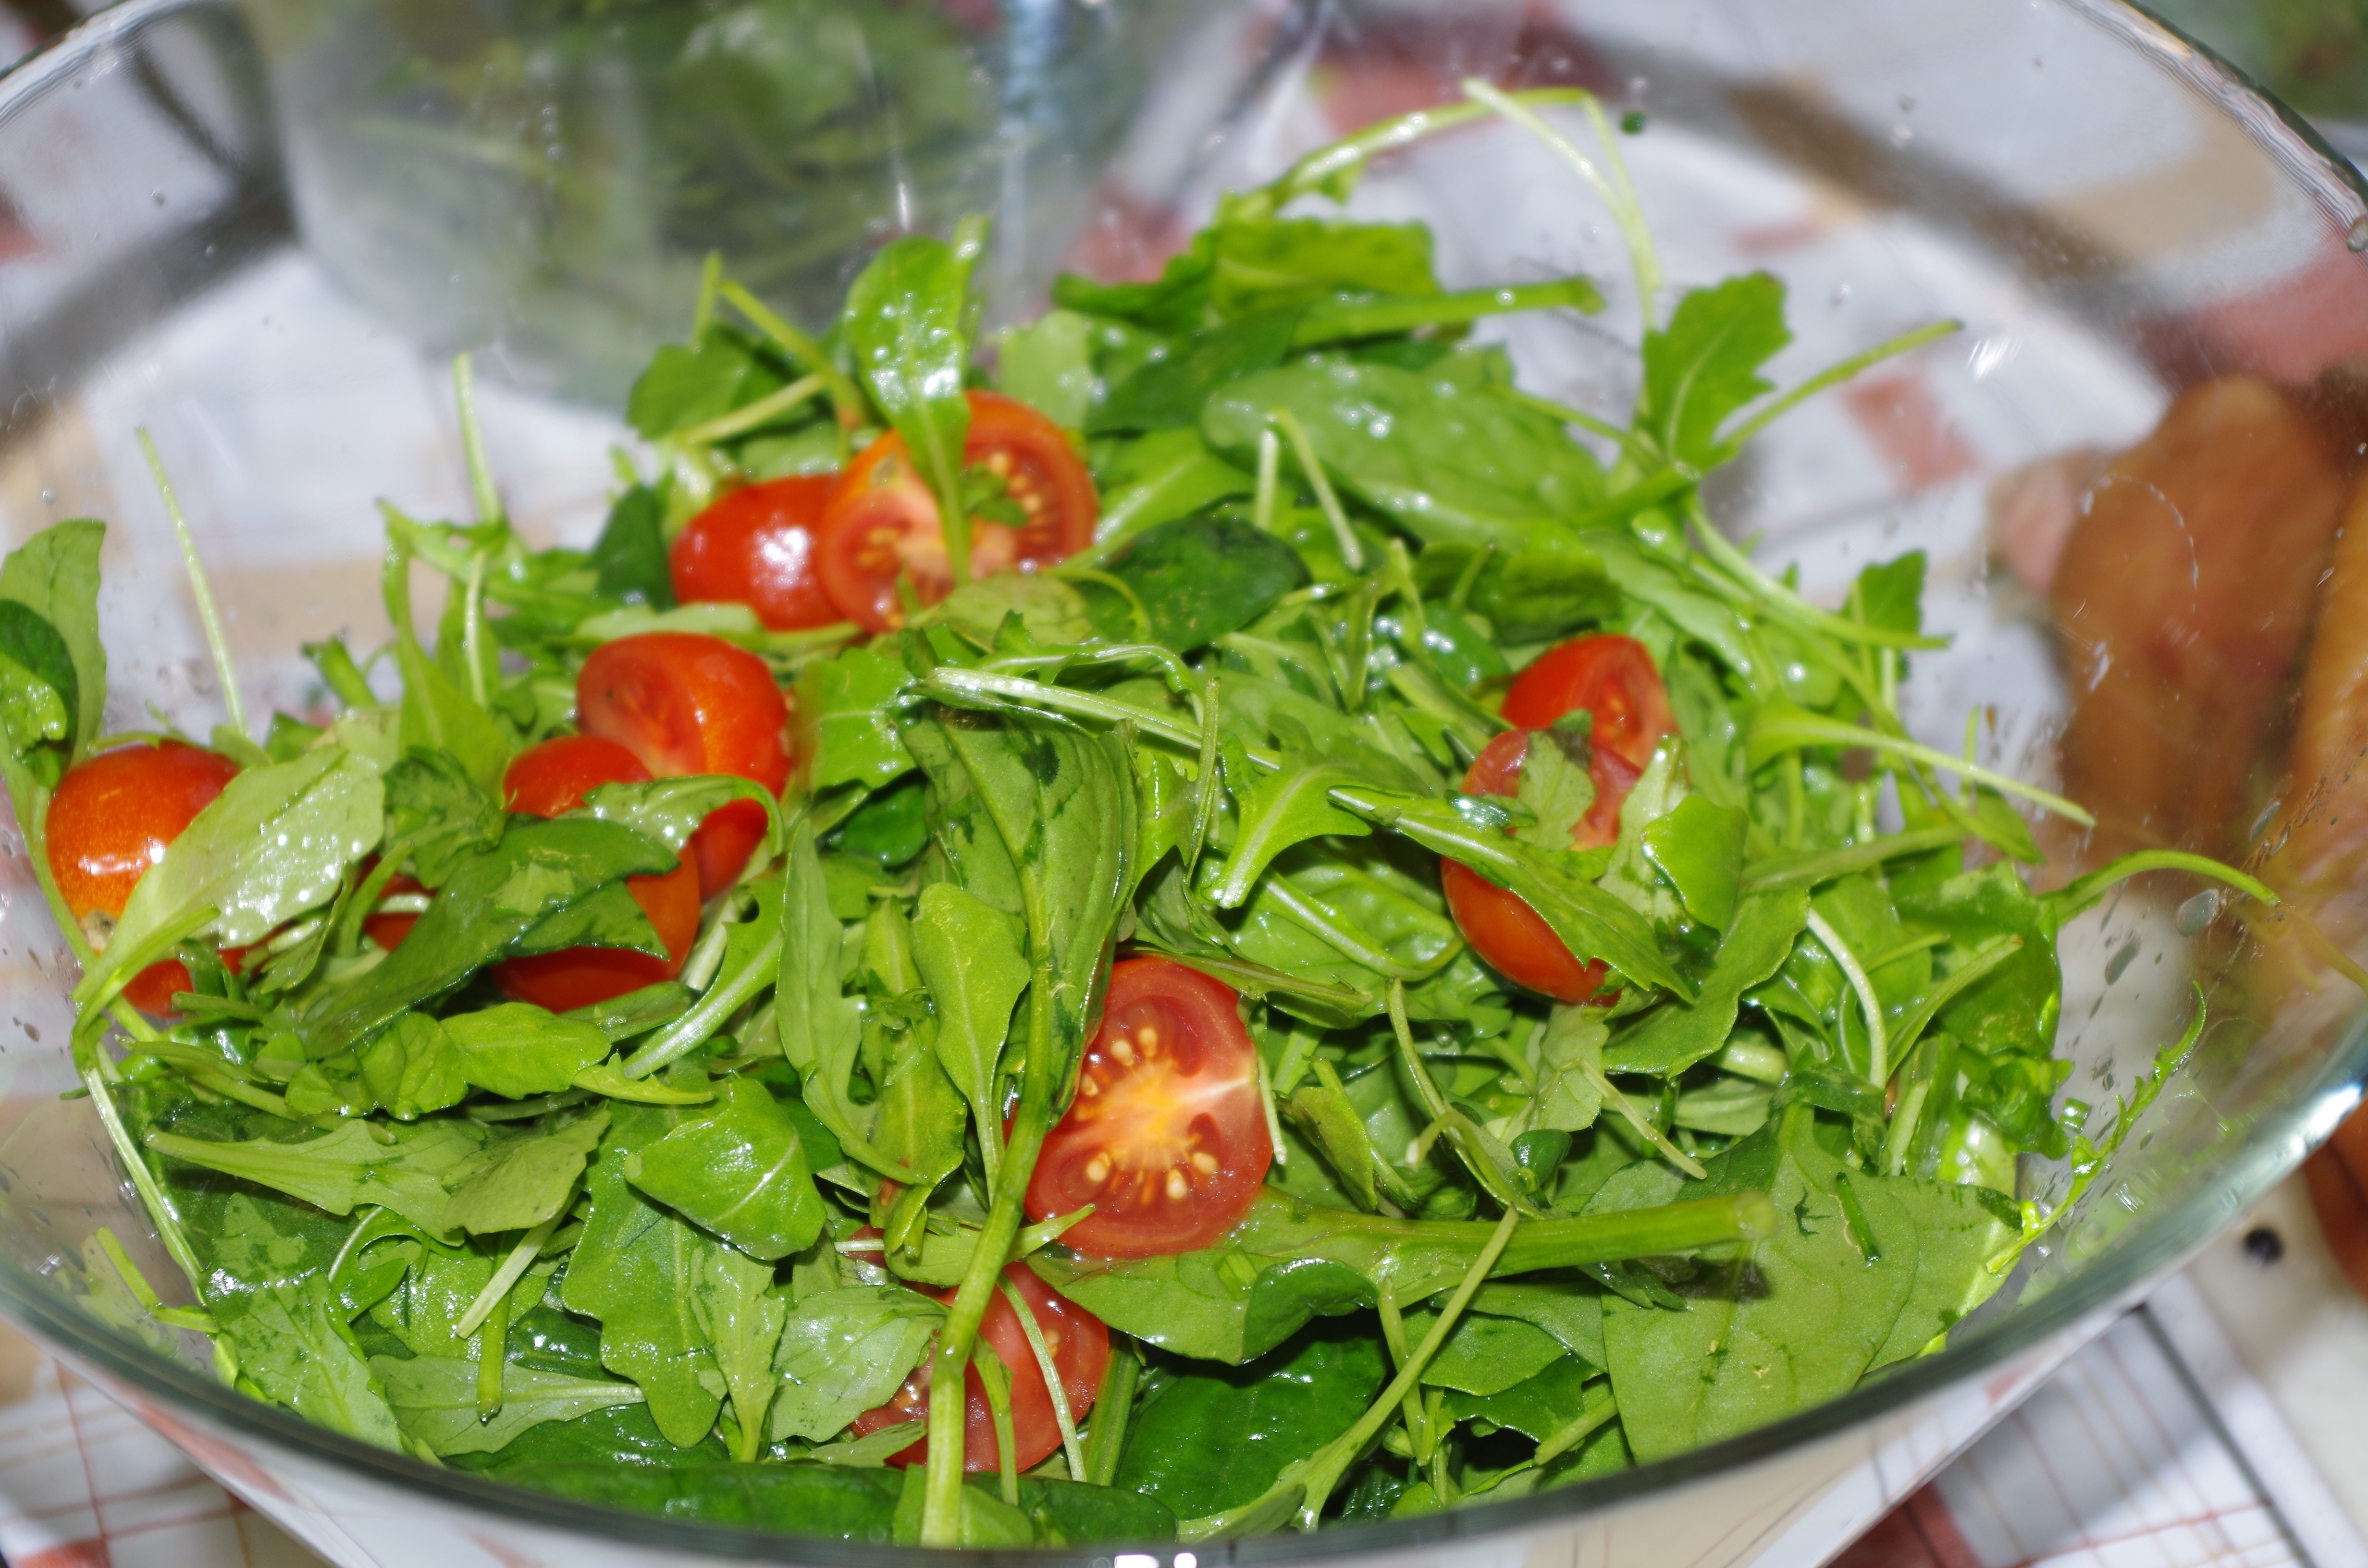 green leafy vegetables and red slice tomato salad